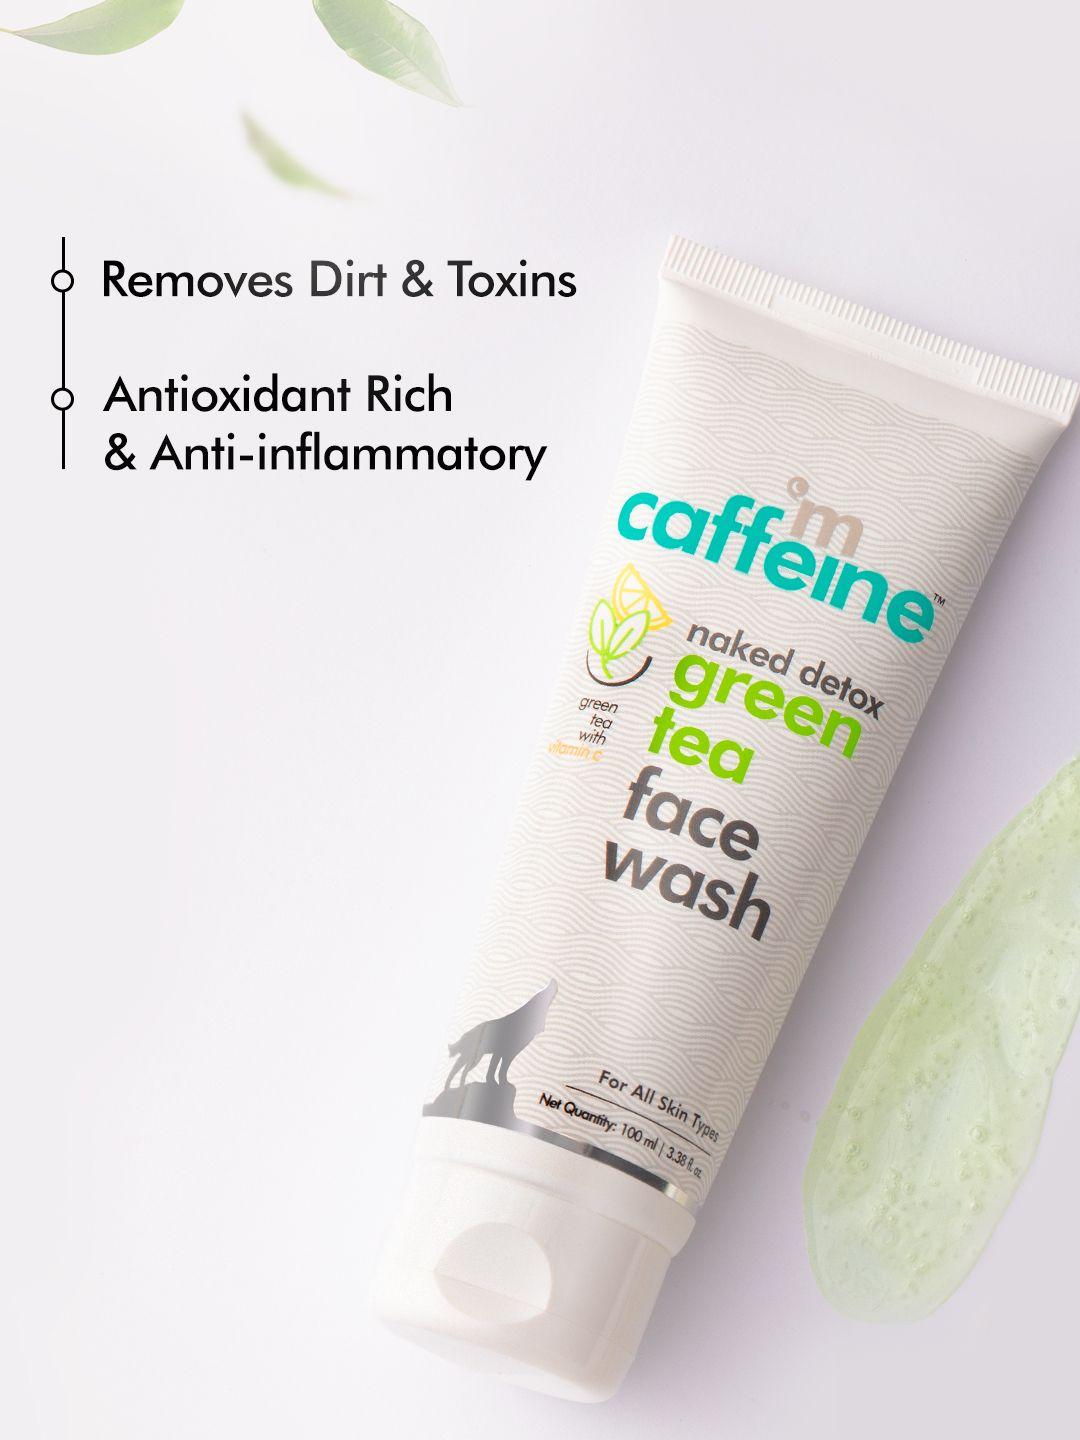 mcaffeine vitamin c green tea face wash with hyaluronic acid dirt removal cleanser-100ml